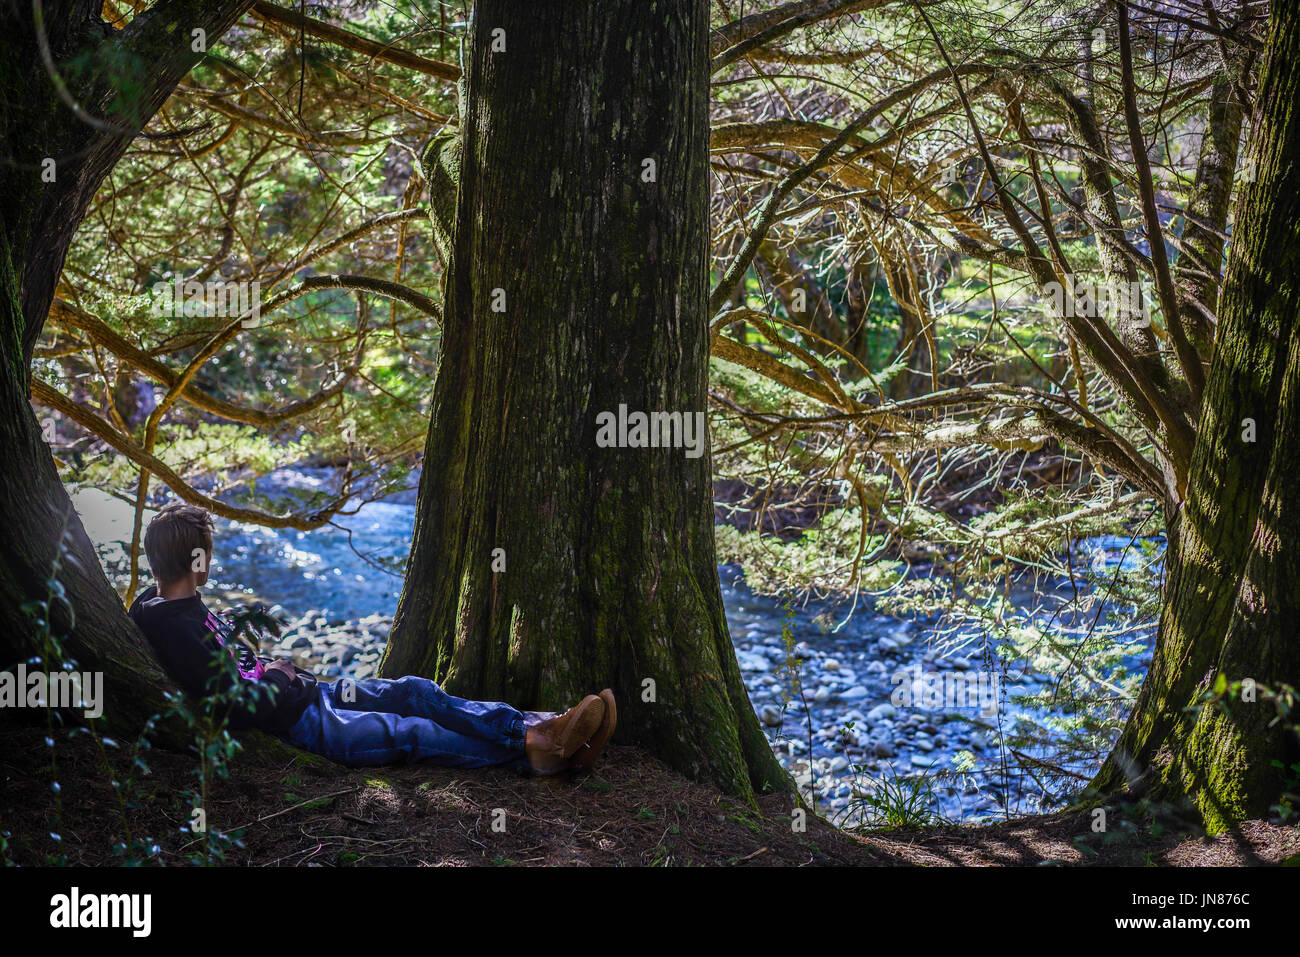 NELSON, NEW ZEALAND - Taking a break to absorb the spectacular surroundings of nature during a hike at the Aniseed Valley Stock Photo